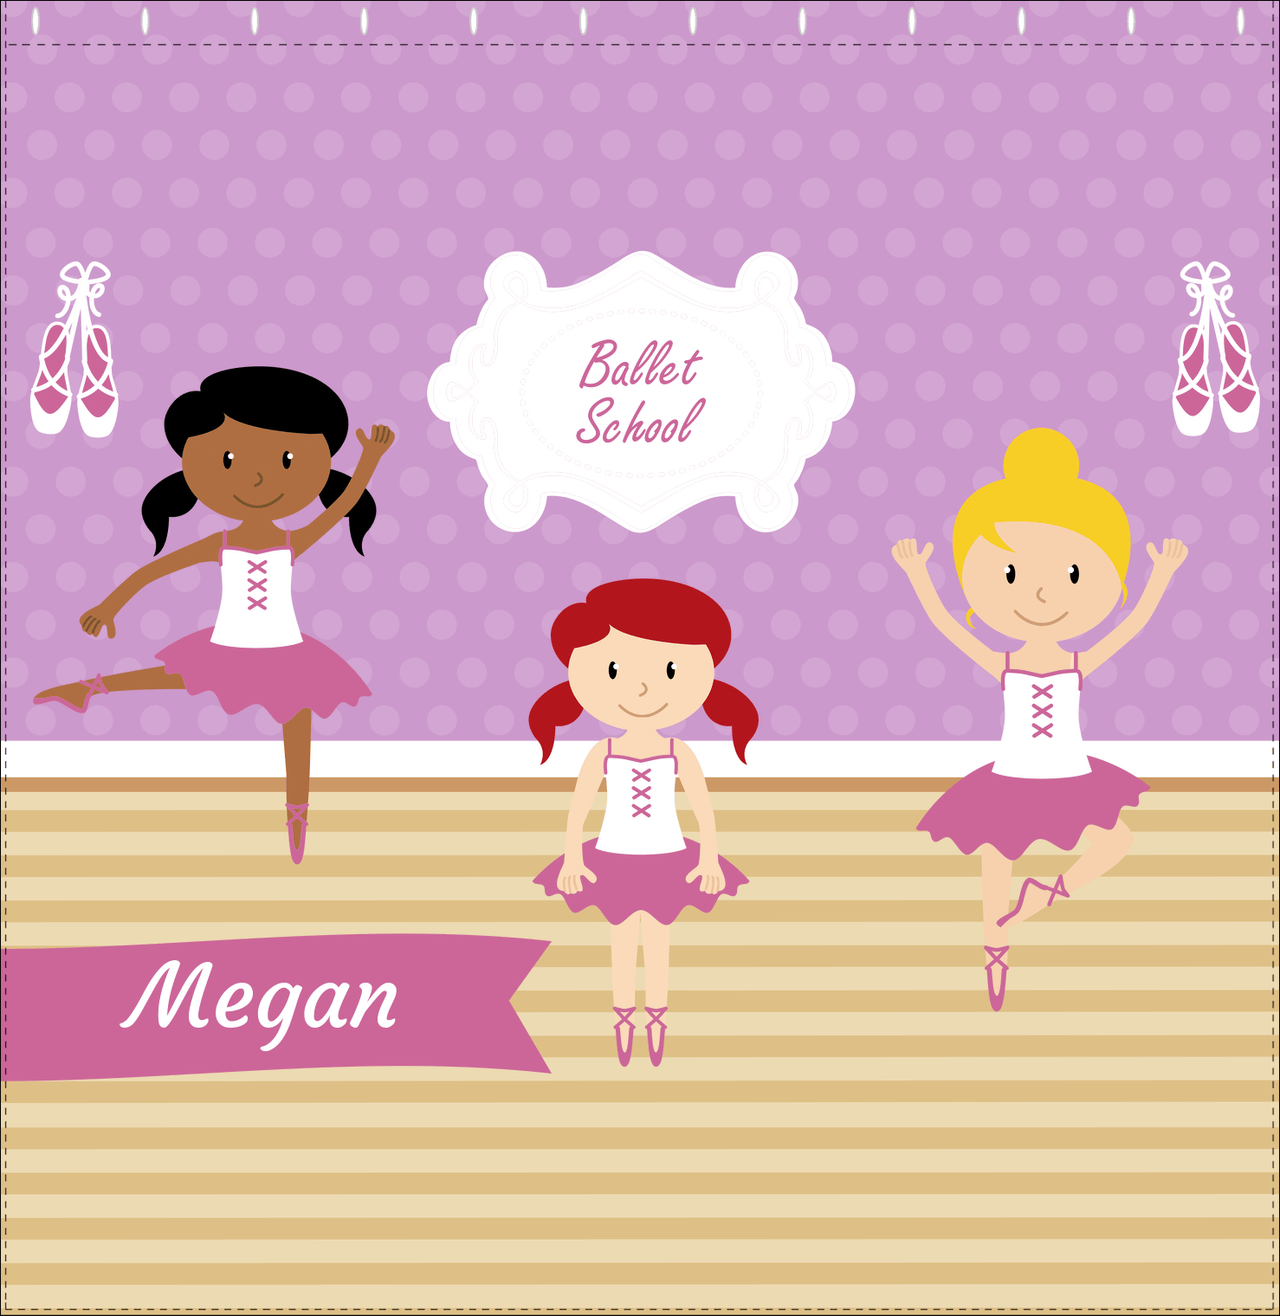 Personalized Ballerina Shower Curtain VI - Ballet School - Lilac Background - Decorate View